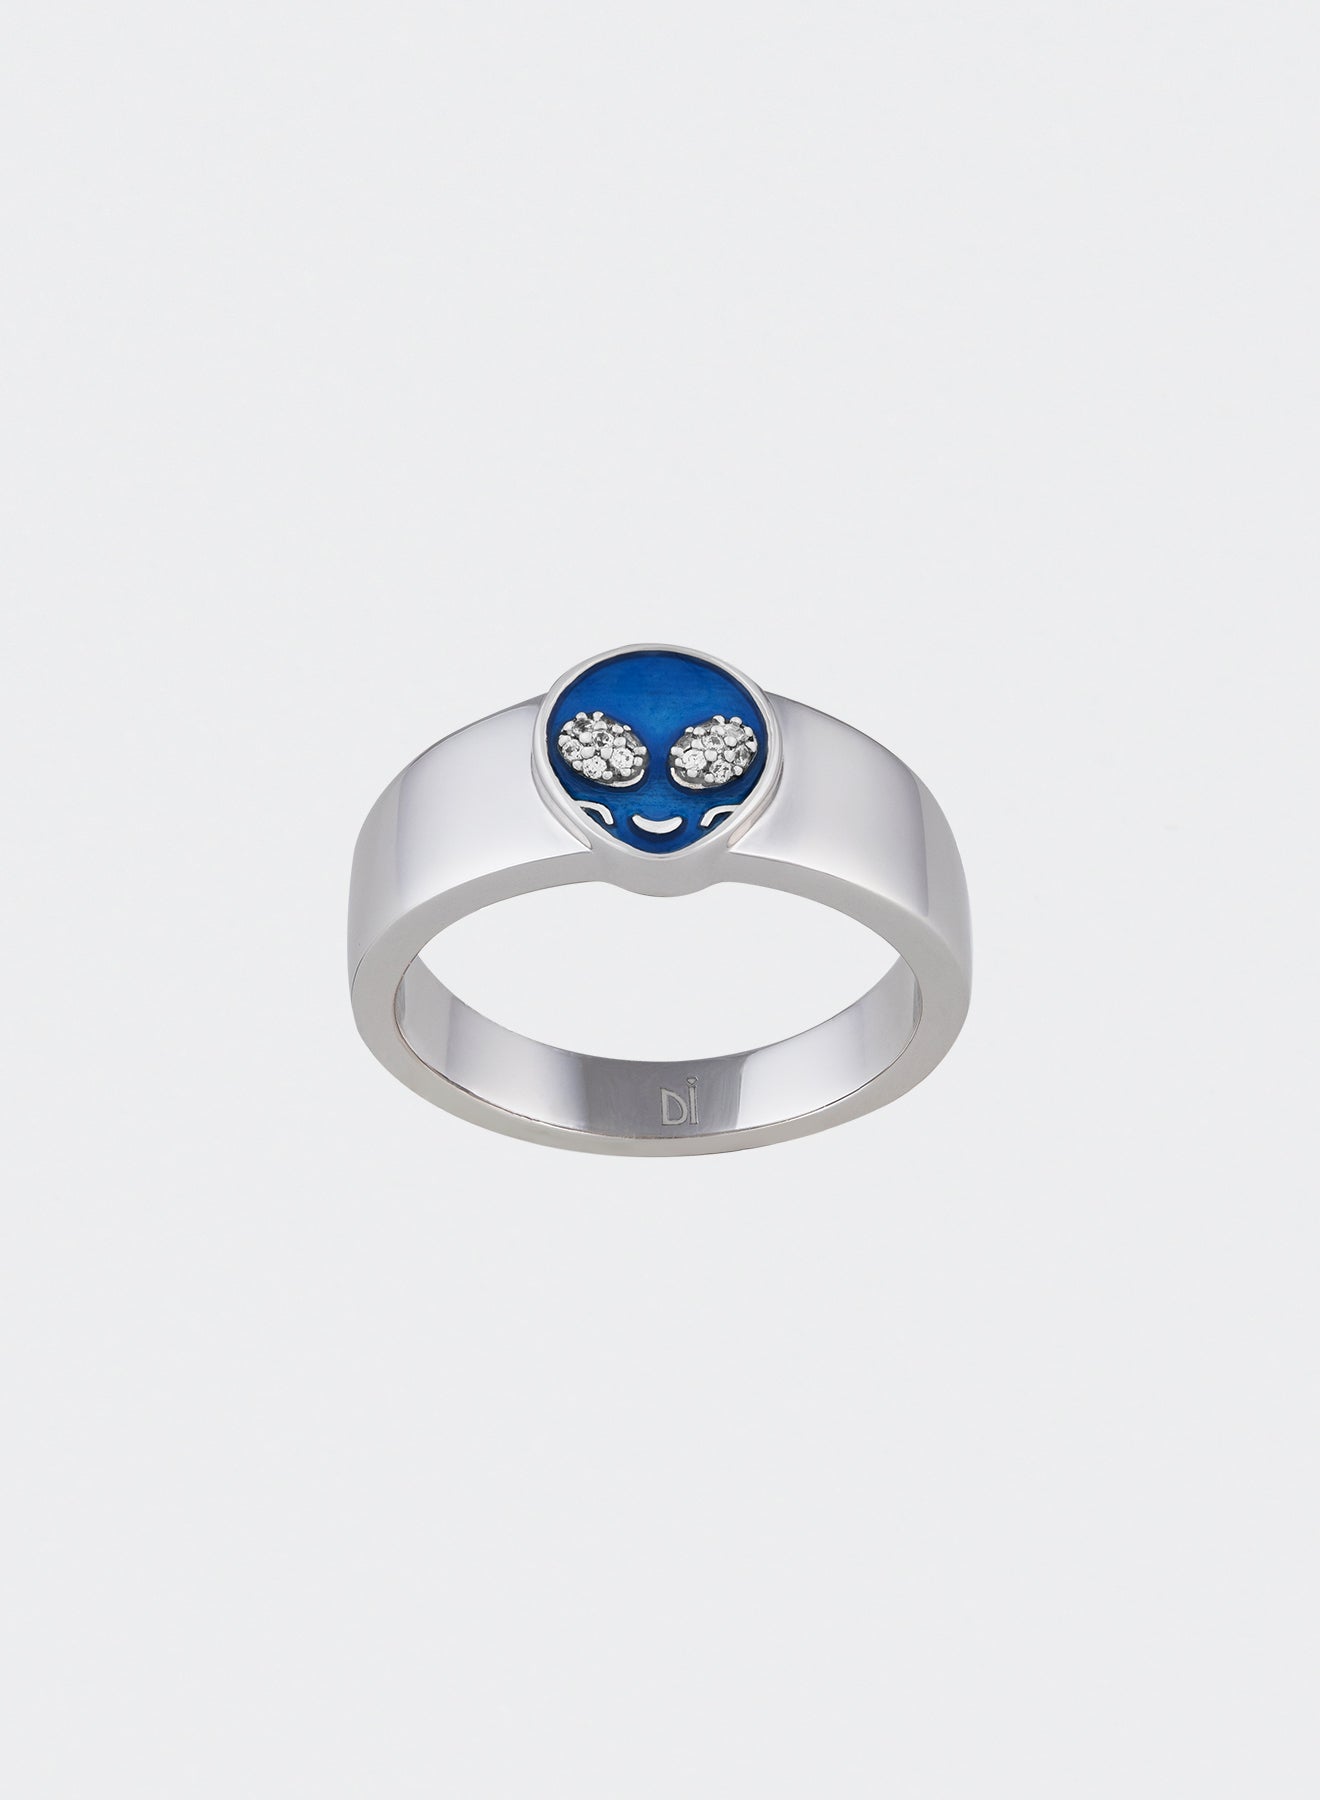 white ring with 18k gold plated and blue alien face for man end woman